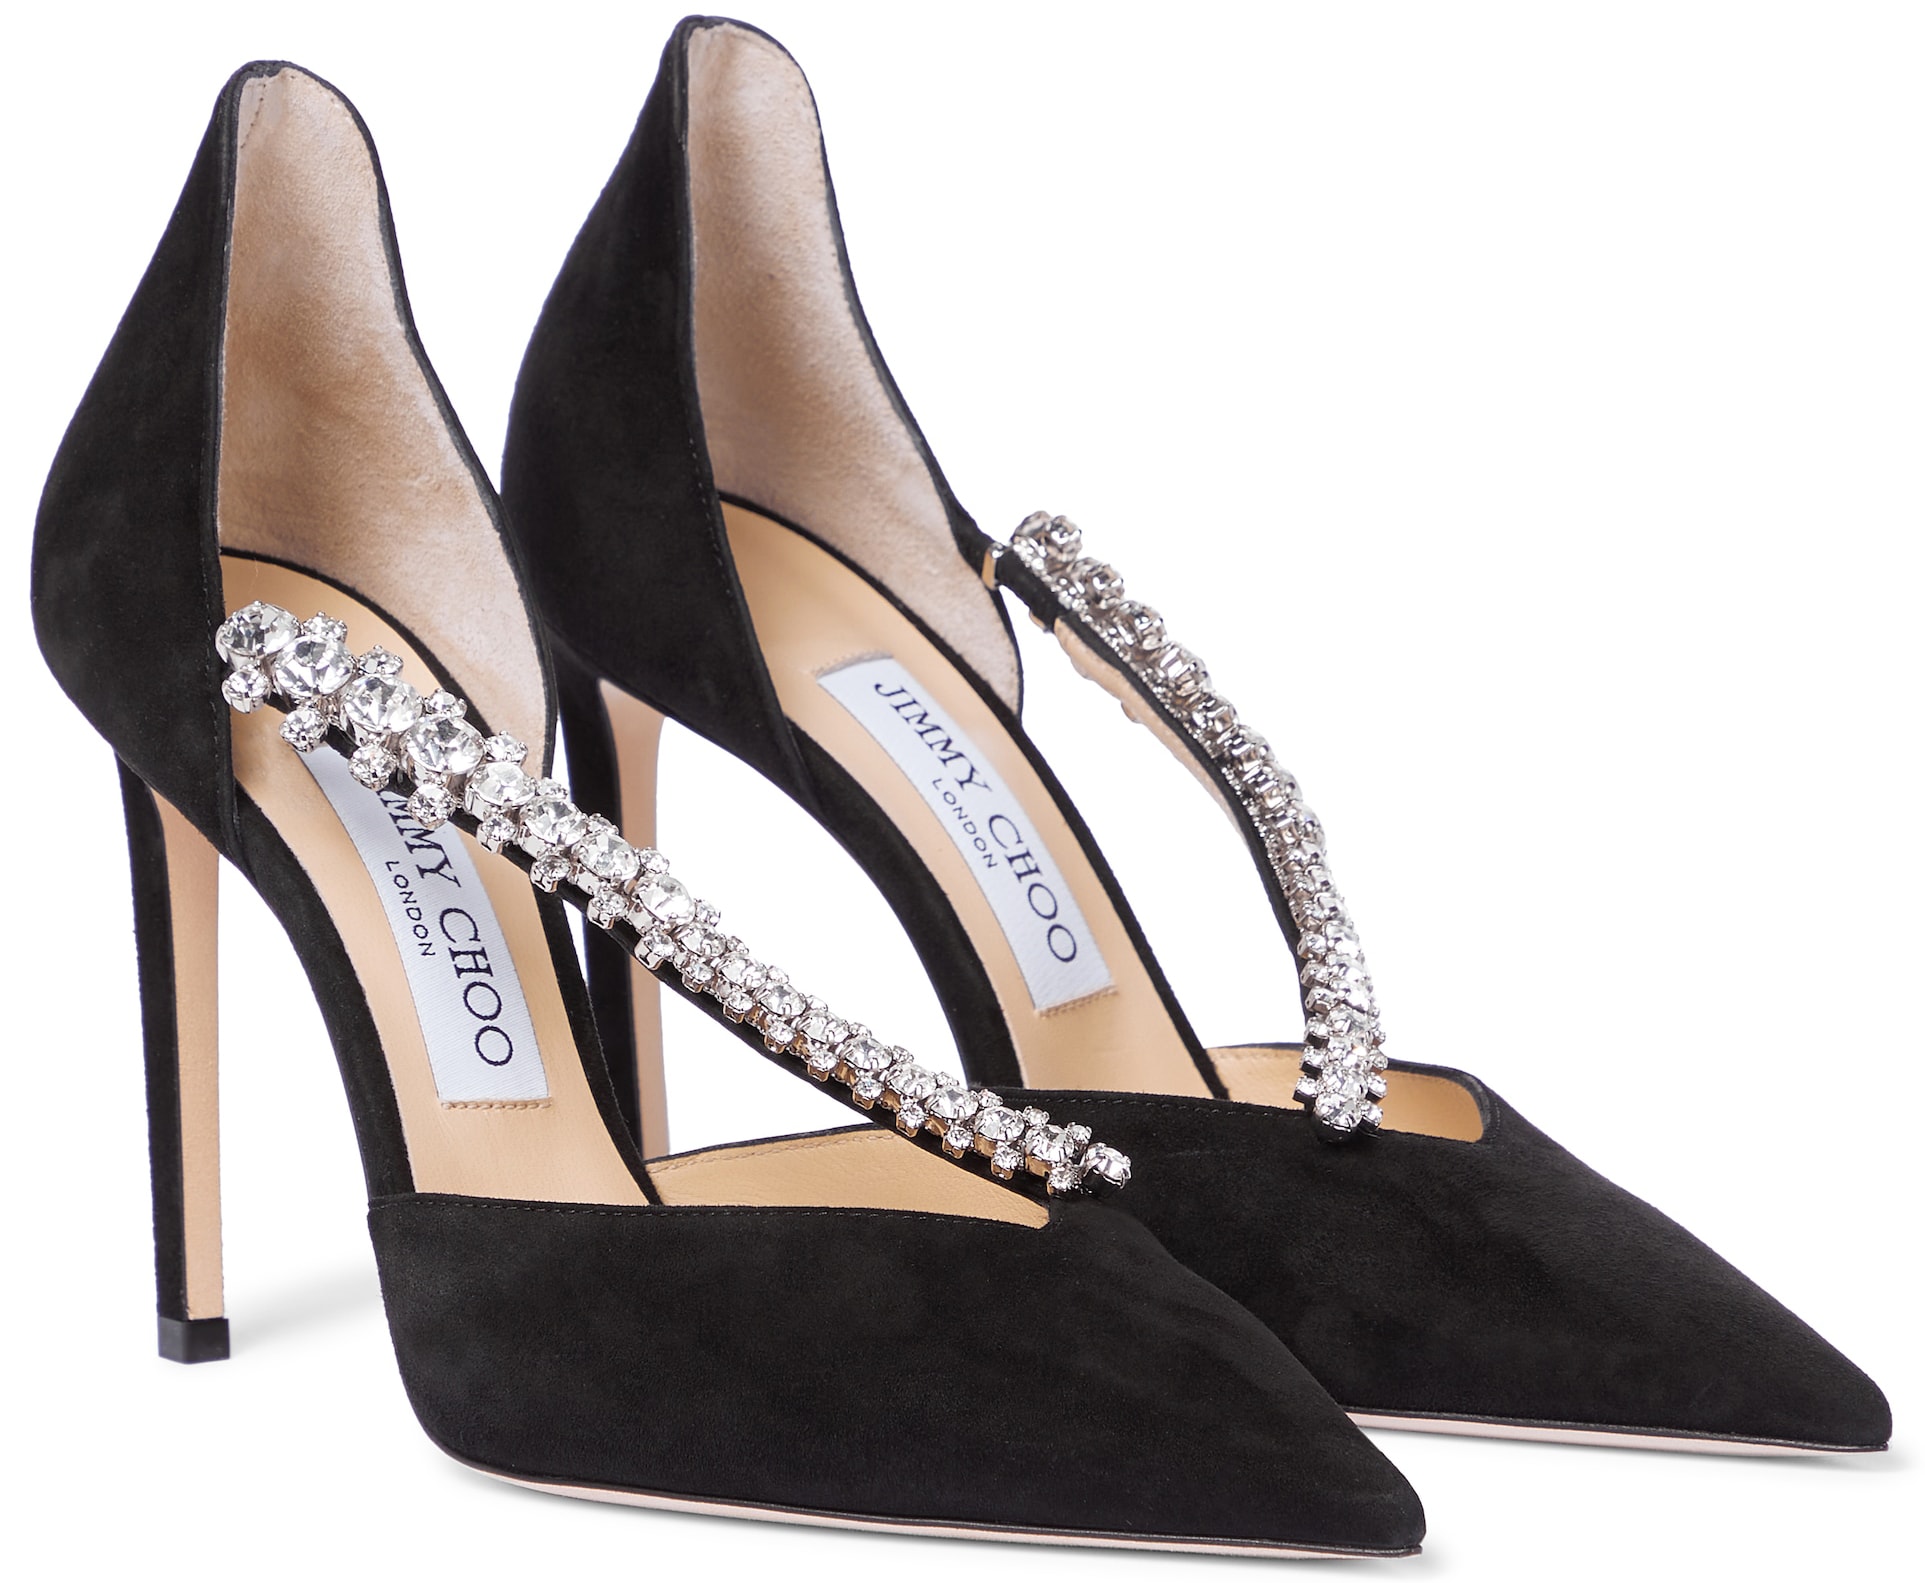 Jimmy Choo's Bee pumps boast a glimmering crystal-embellished strap and a stiletto heel